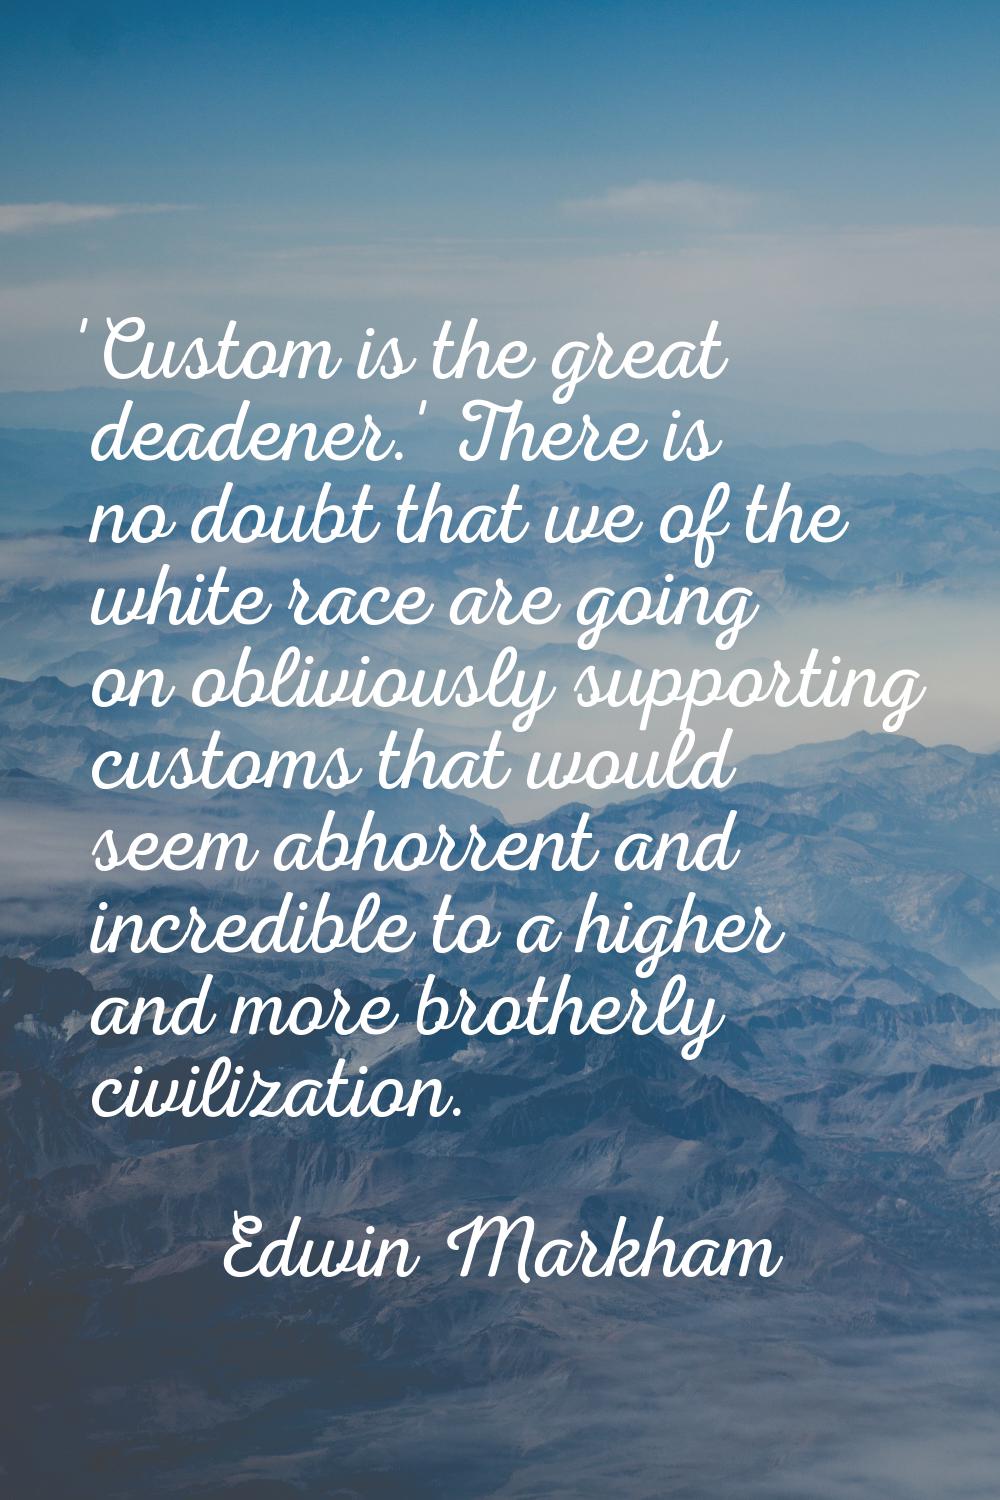 'Custom is the great deadener.' There is no doubt that we of the white race are going on obliviousl